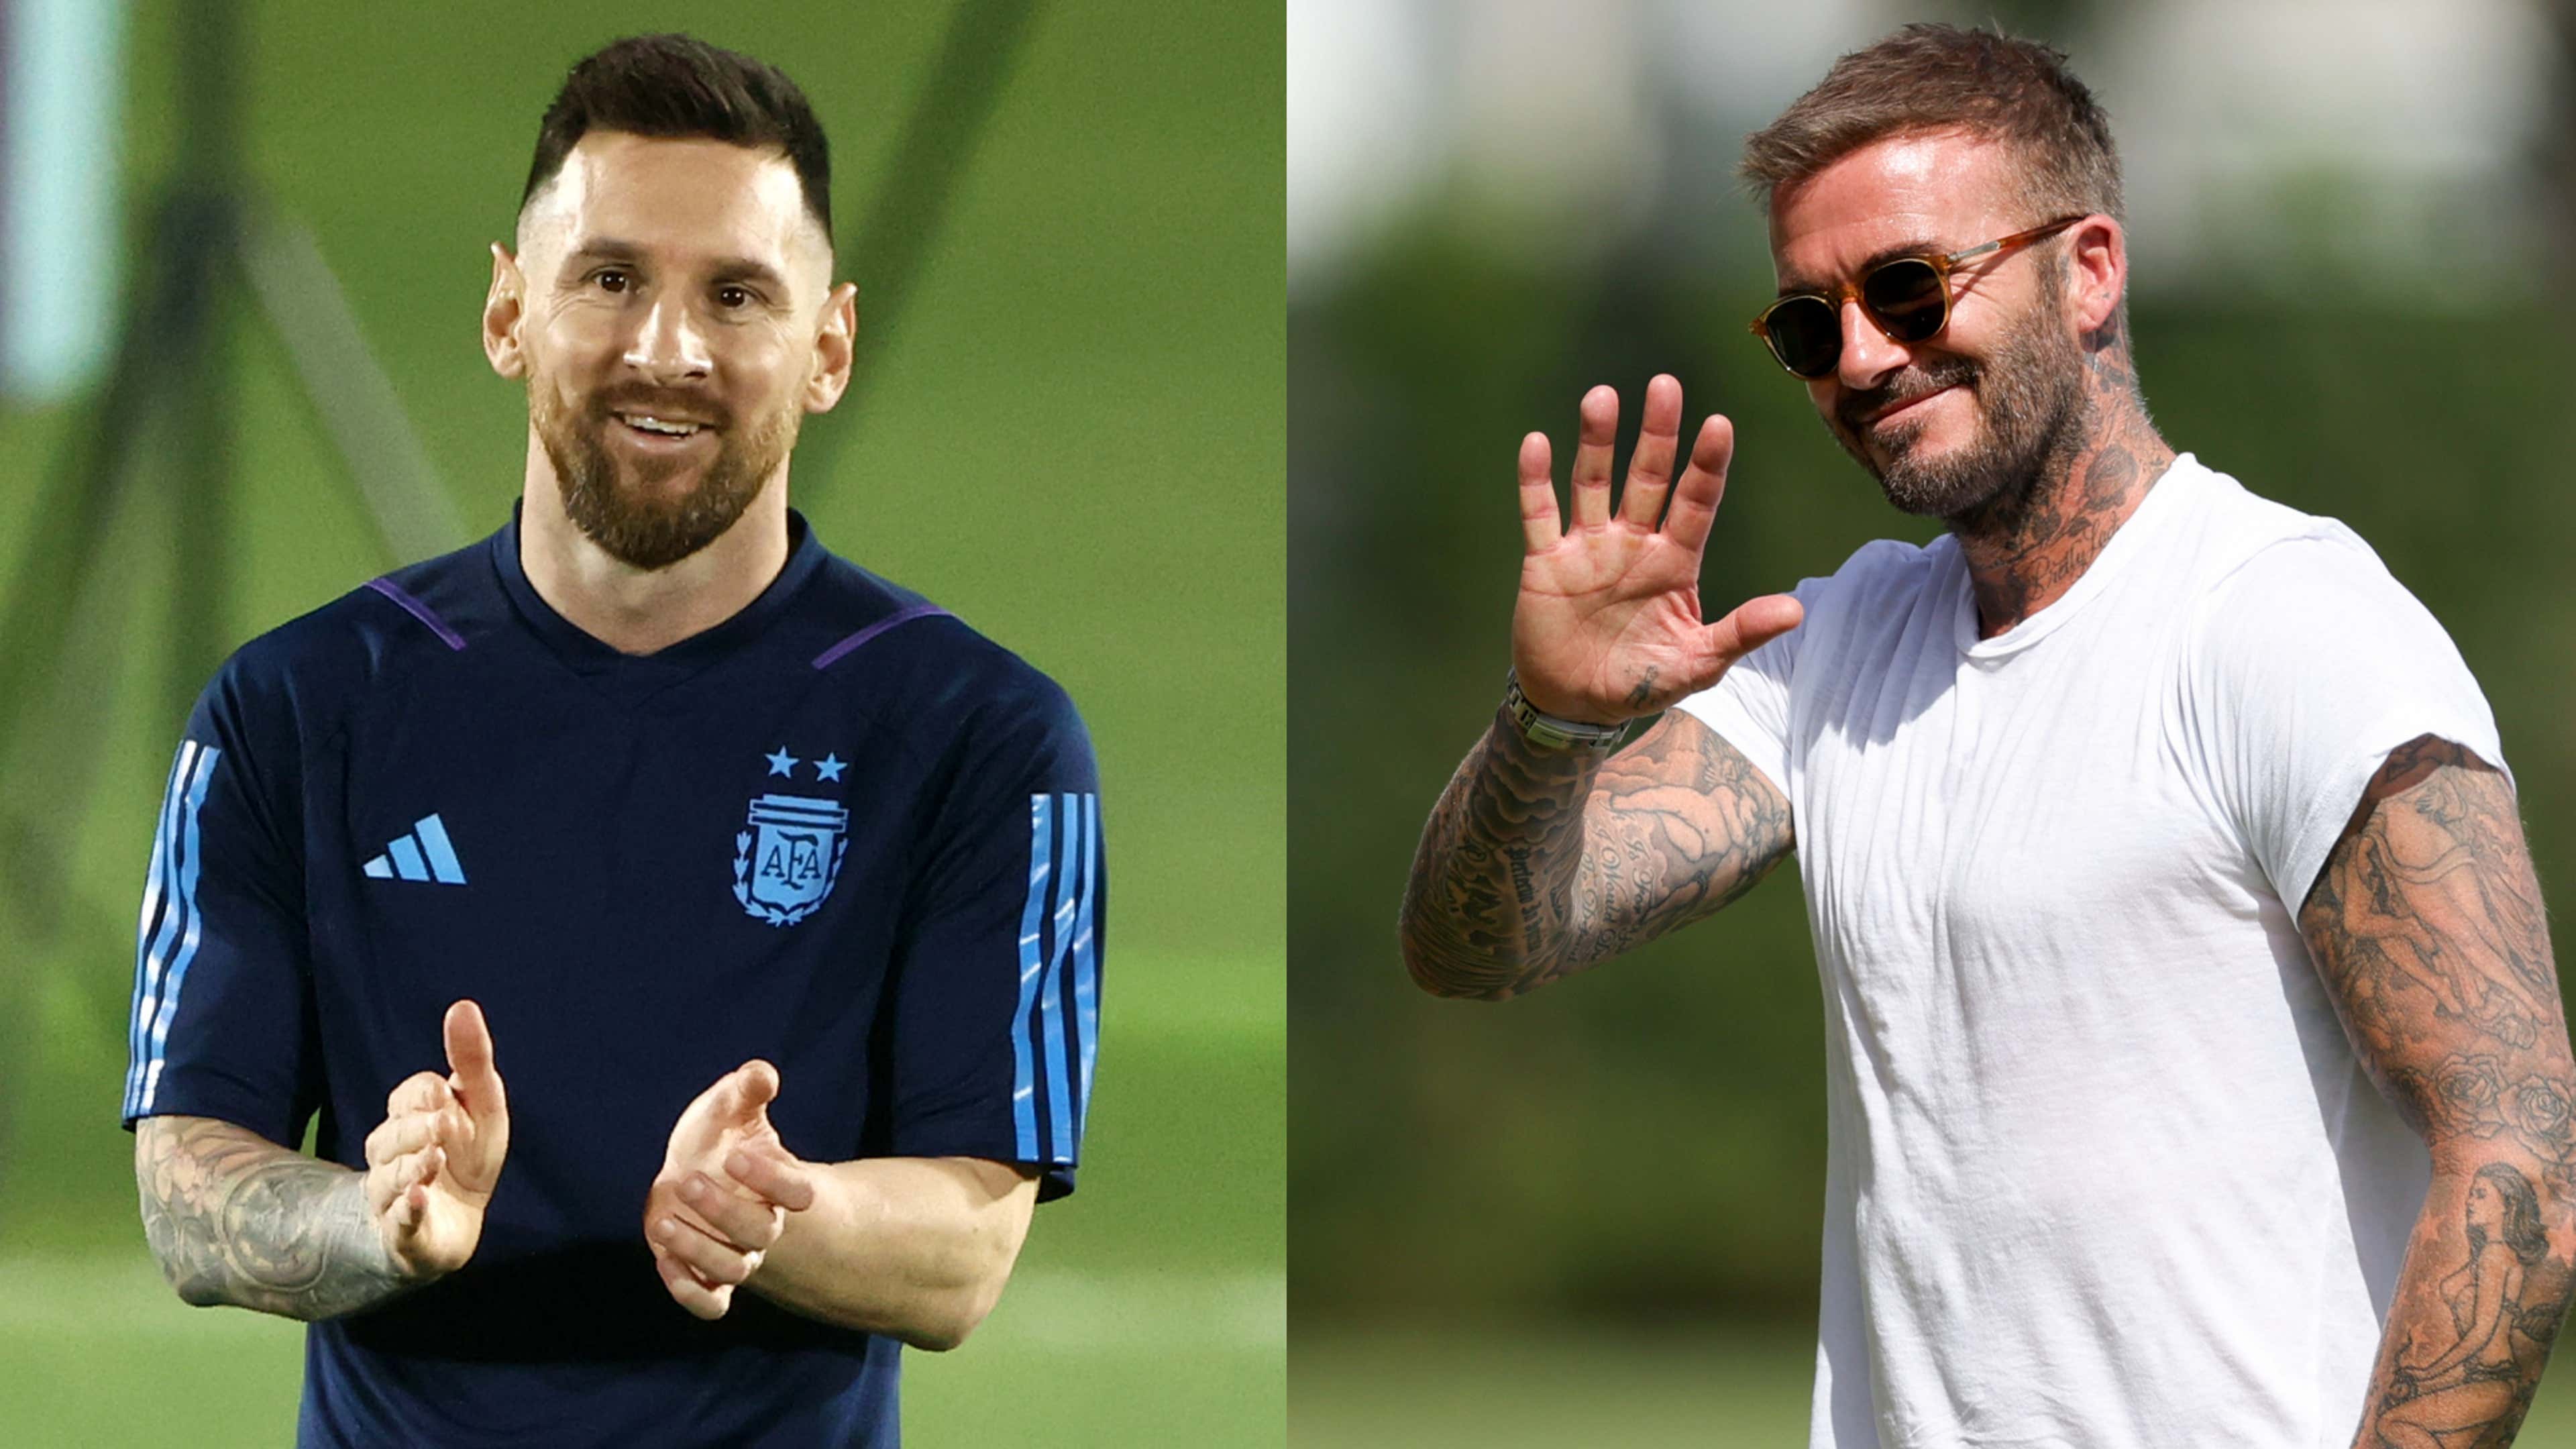 I Couldnt Be Prouder David Beckham Sends Welcome Message To Lionel Messi After Inter Miami